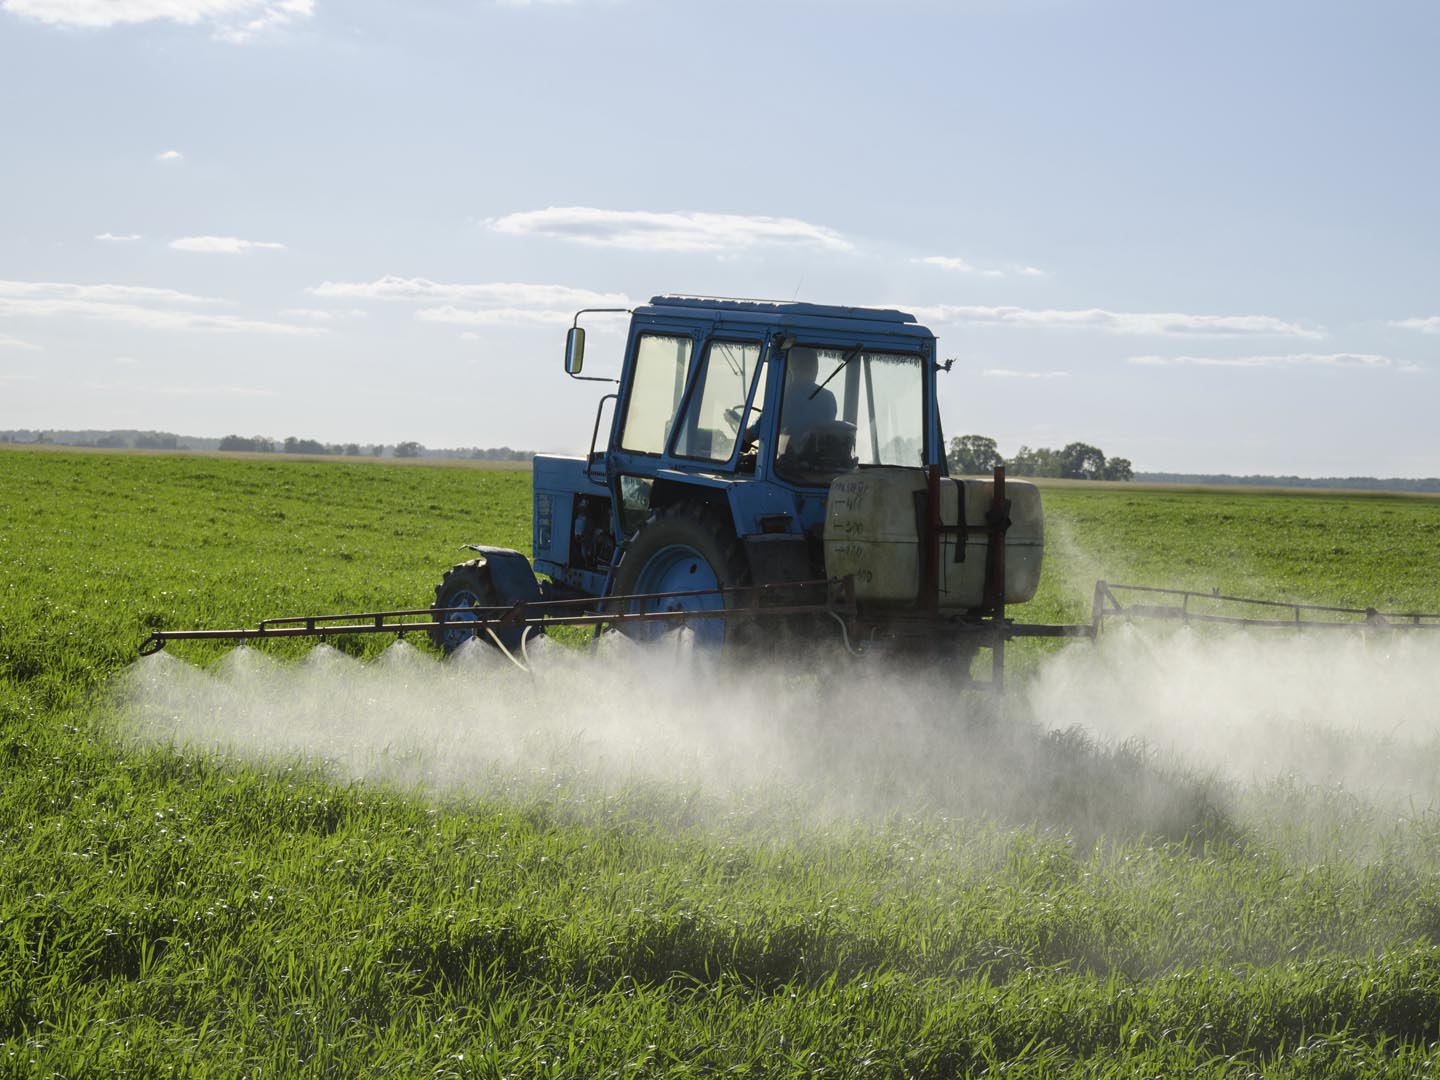 Tractor spray fertilize field with insecticide herbicide chemicals in agriculture field and evening sunlight.